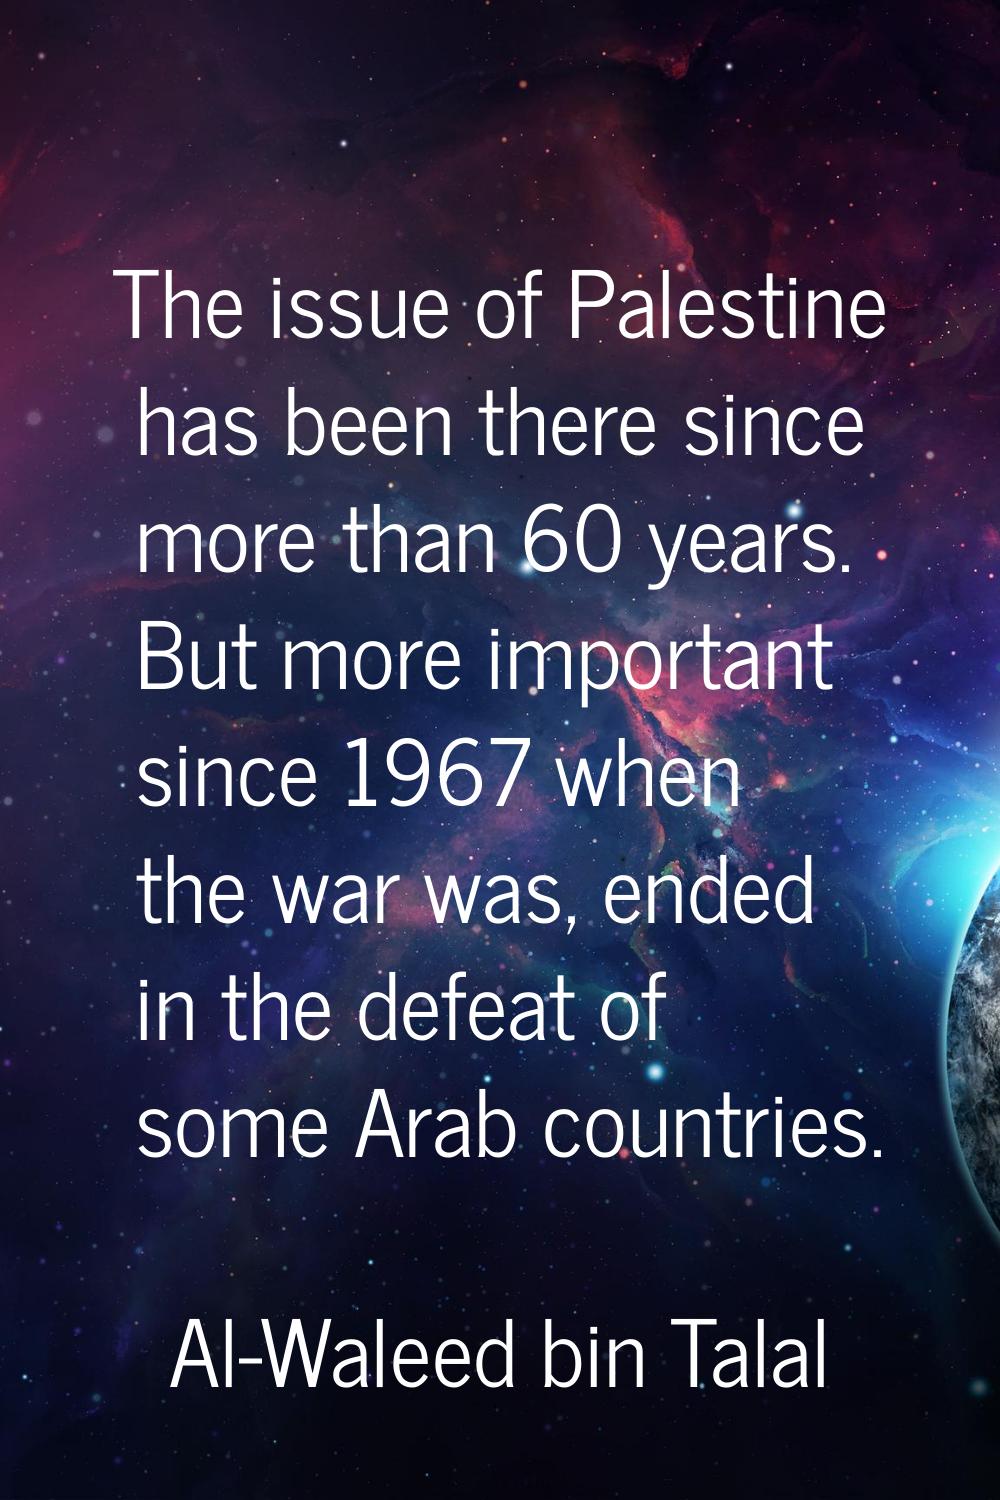 The issue of Palestine has been there since more than 60 years. But more important since 1967 when 